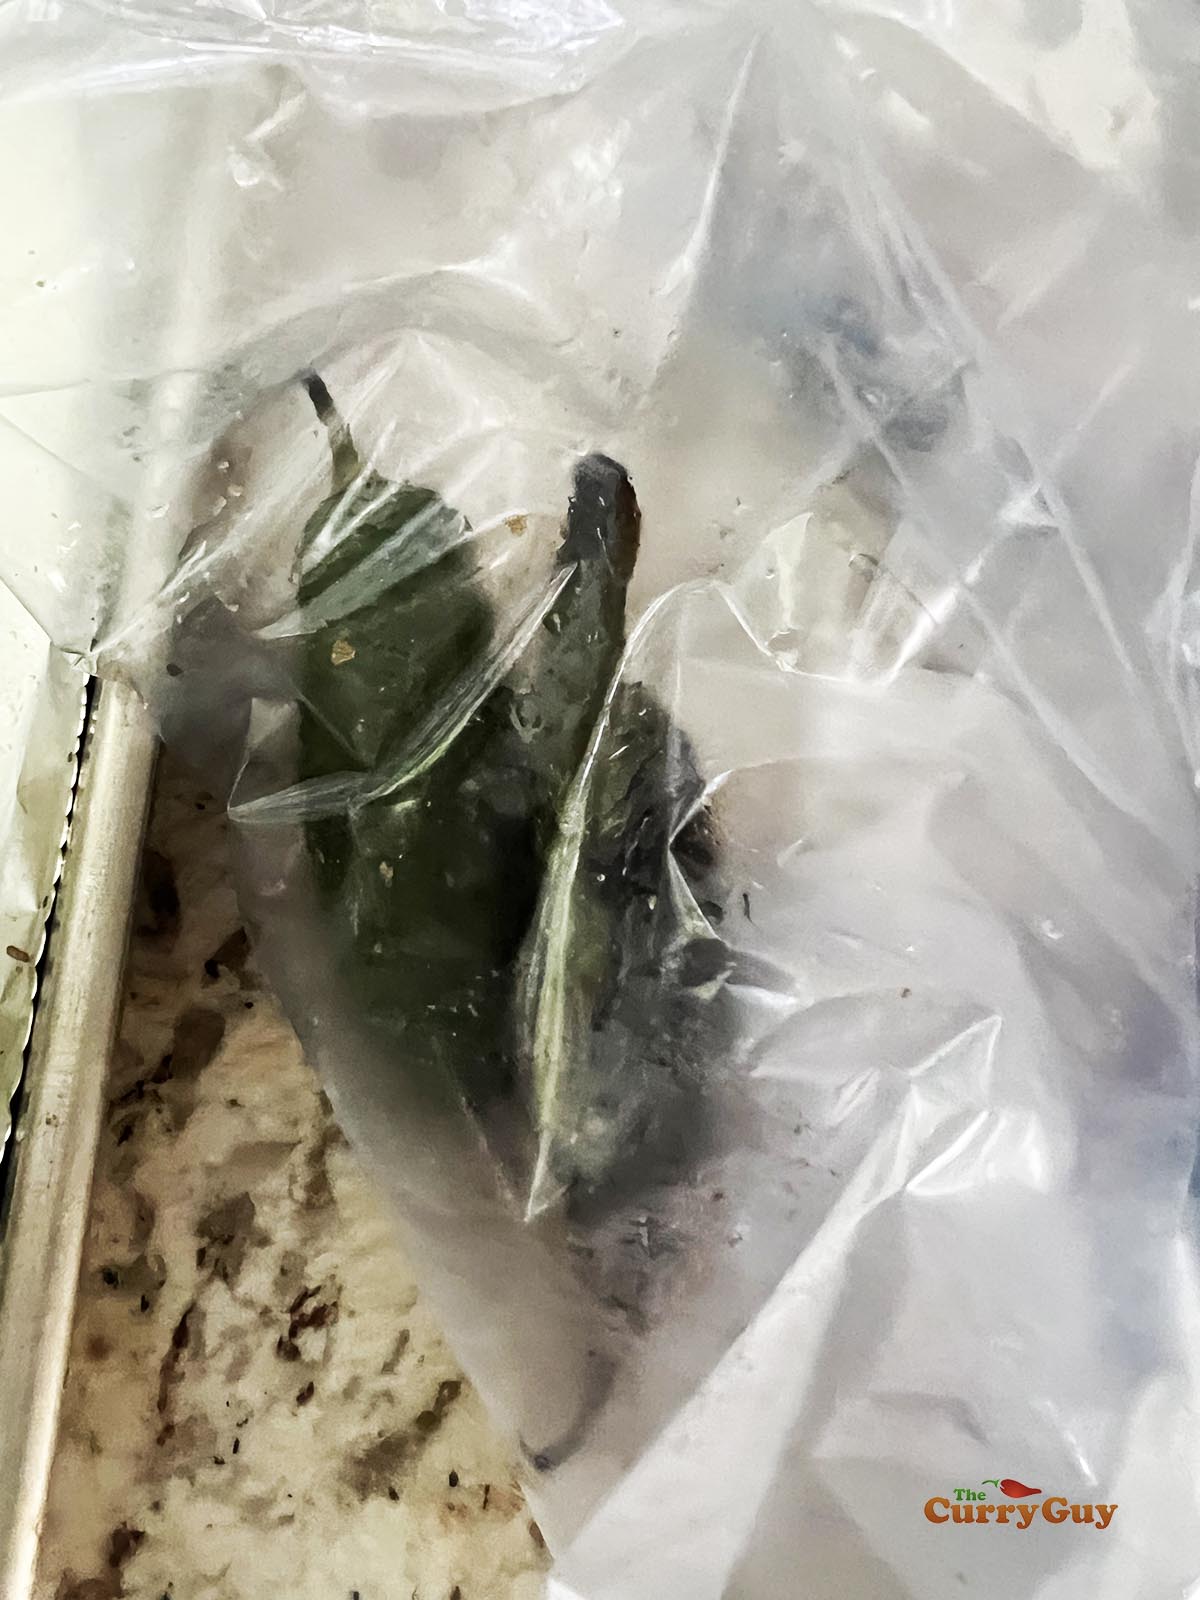 Chilies in a plastic bag, softening to remove the skin.